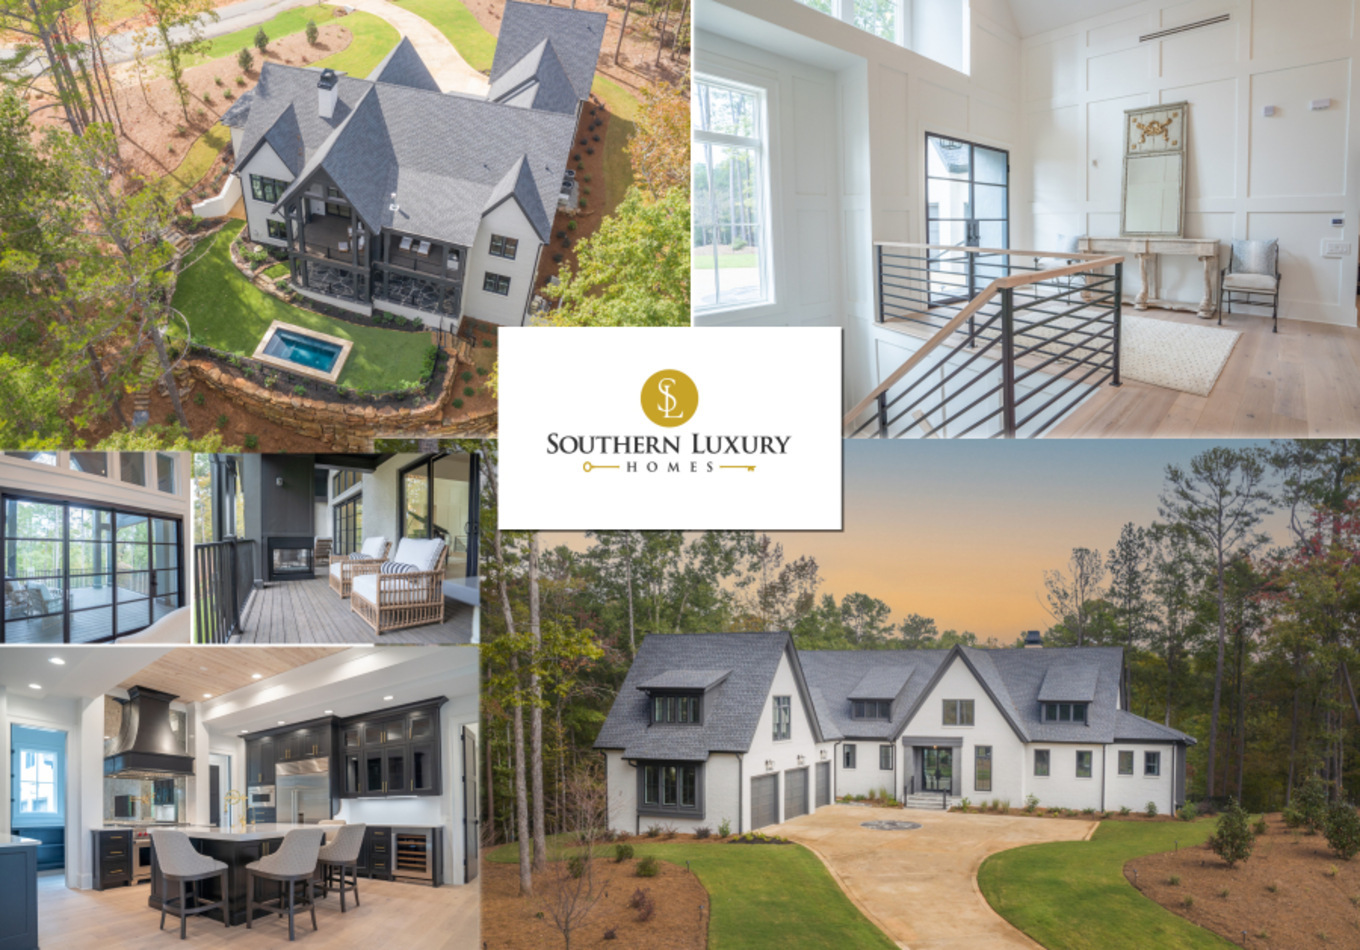 Southen Luxury Homes, Tuesday, January 4, 2022, Press release picture